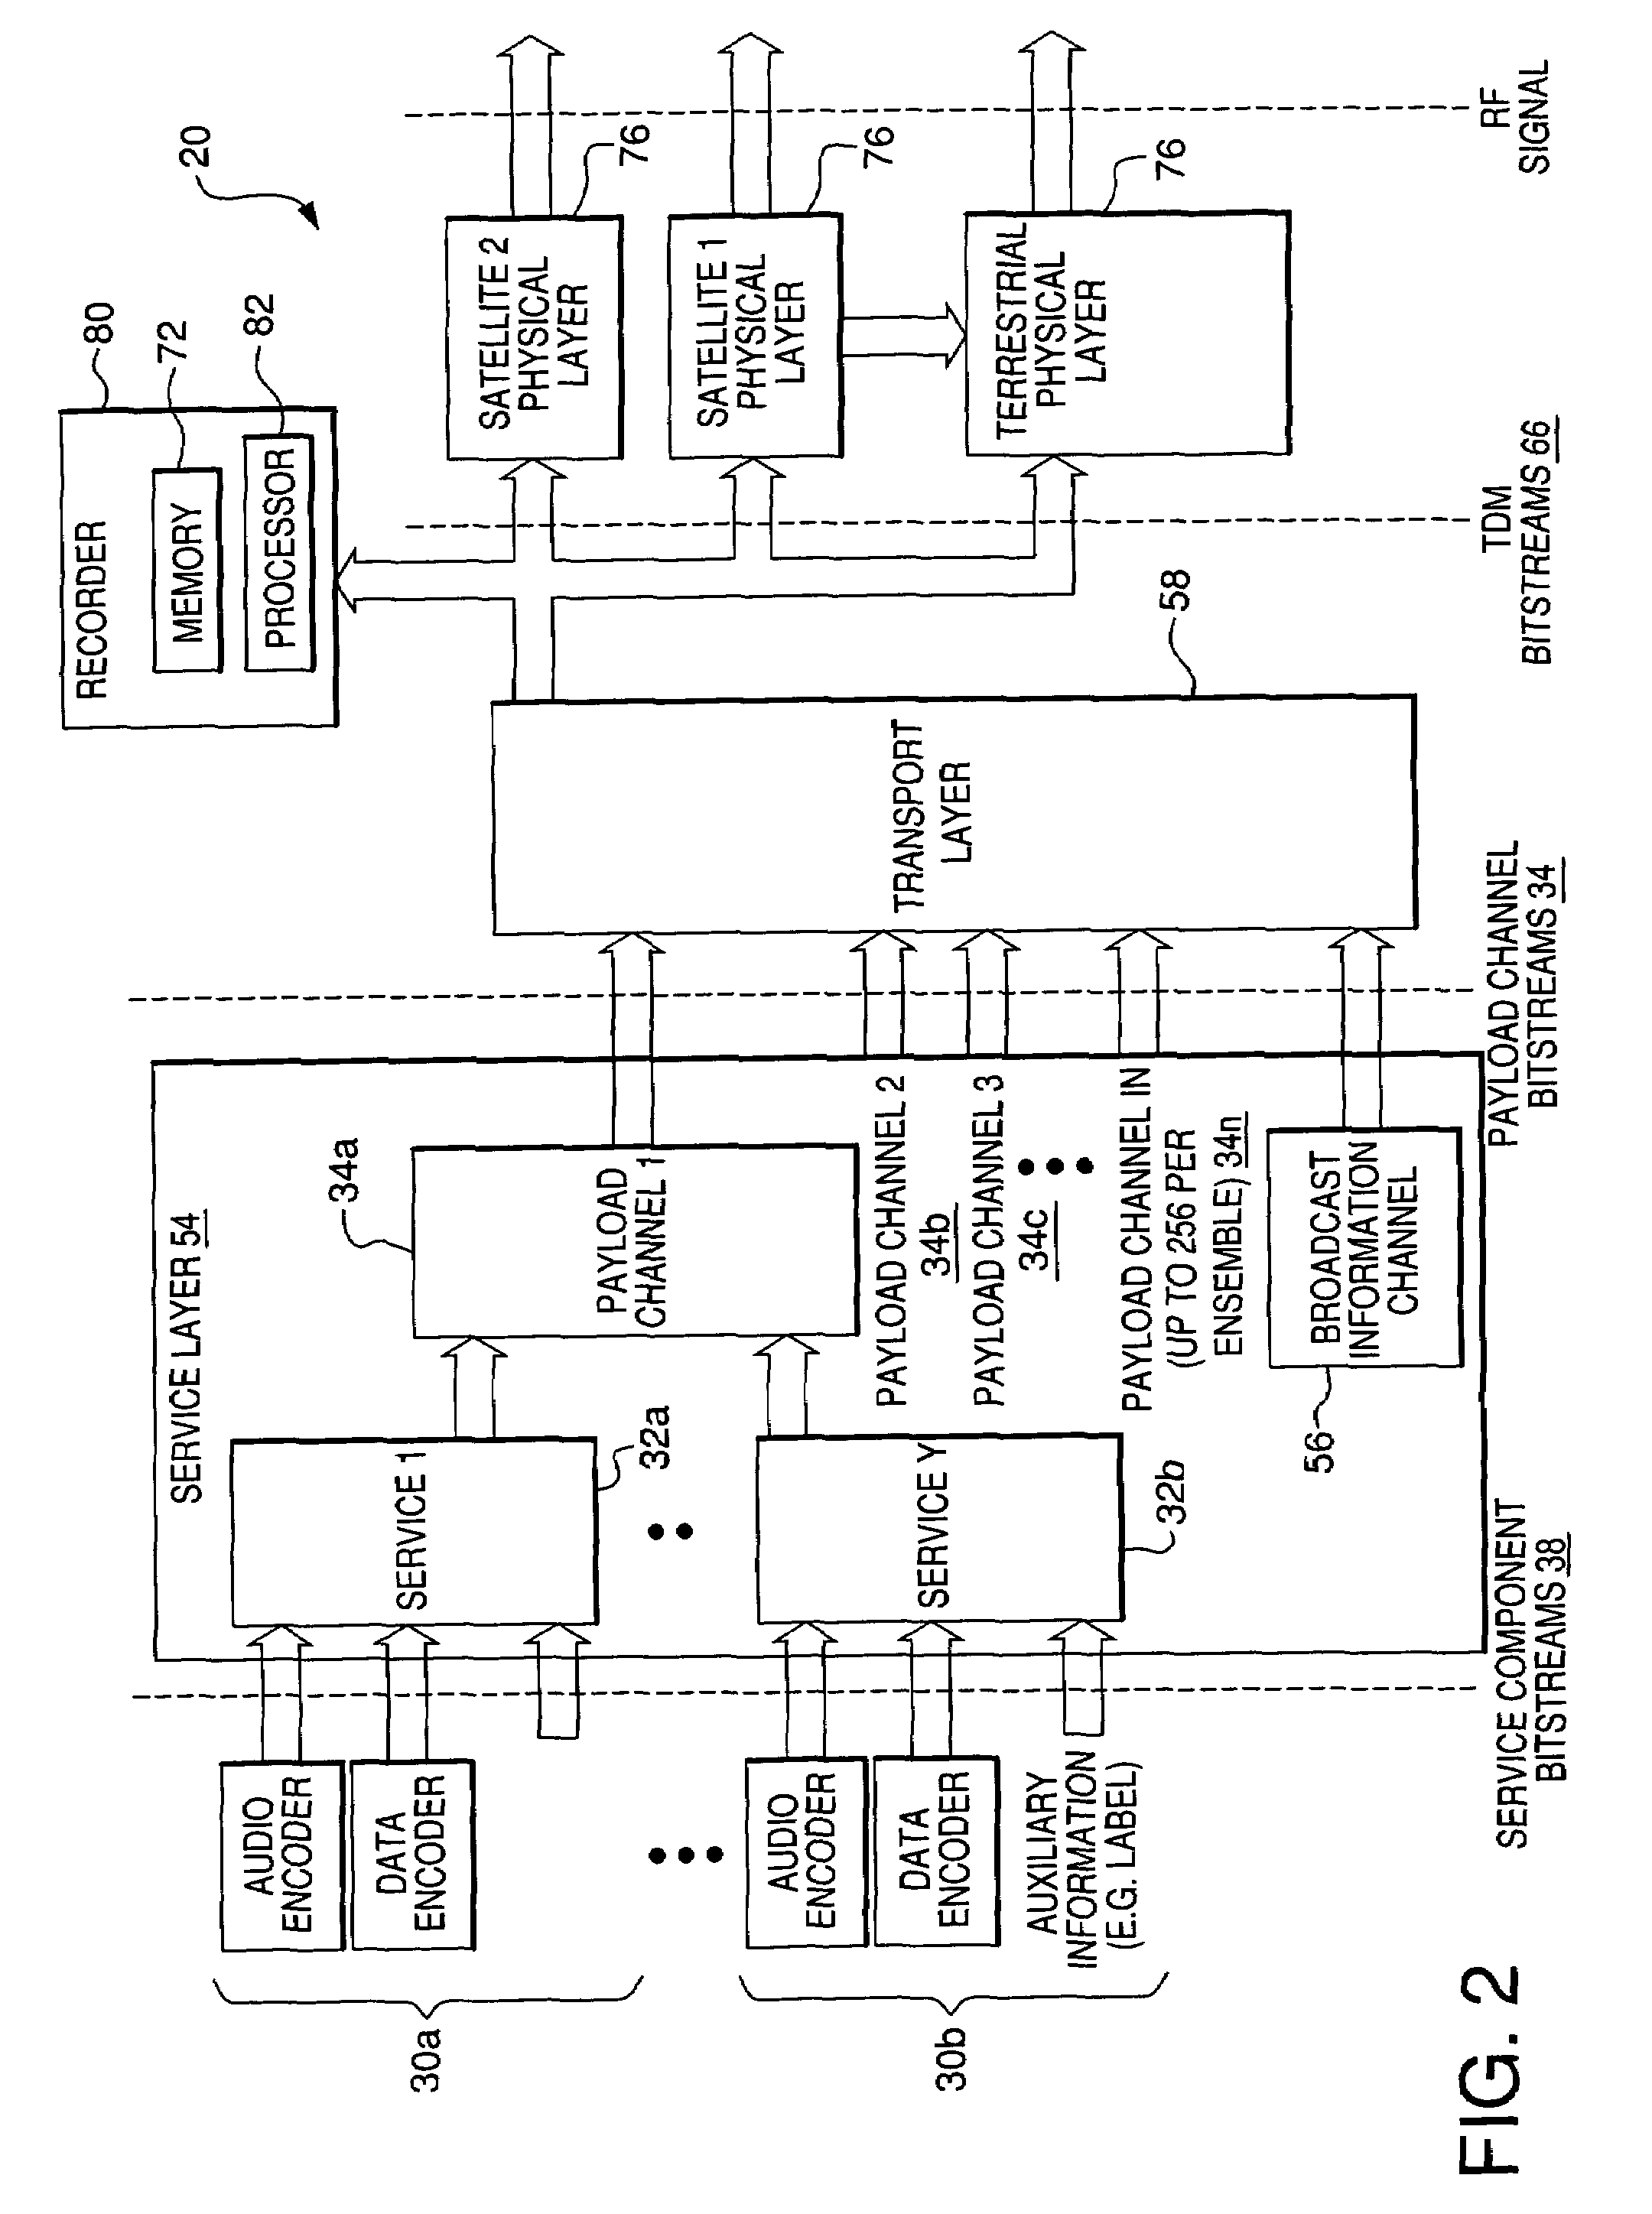 System and method for providing recording and playback of digital media content